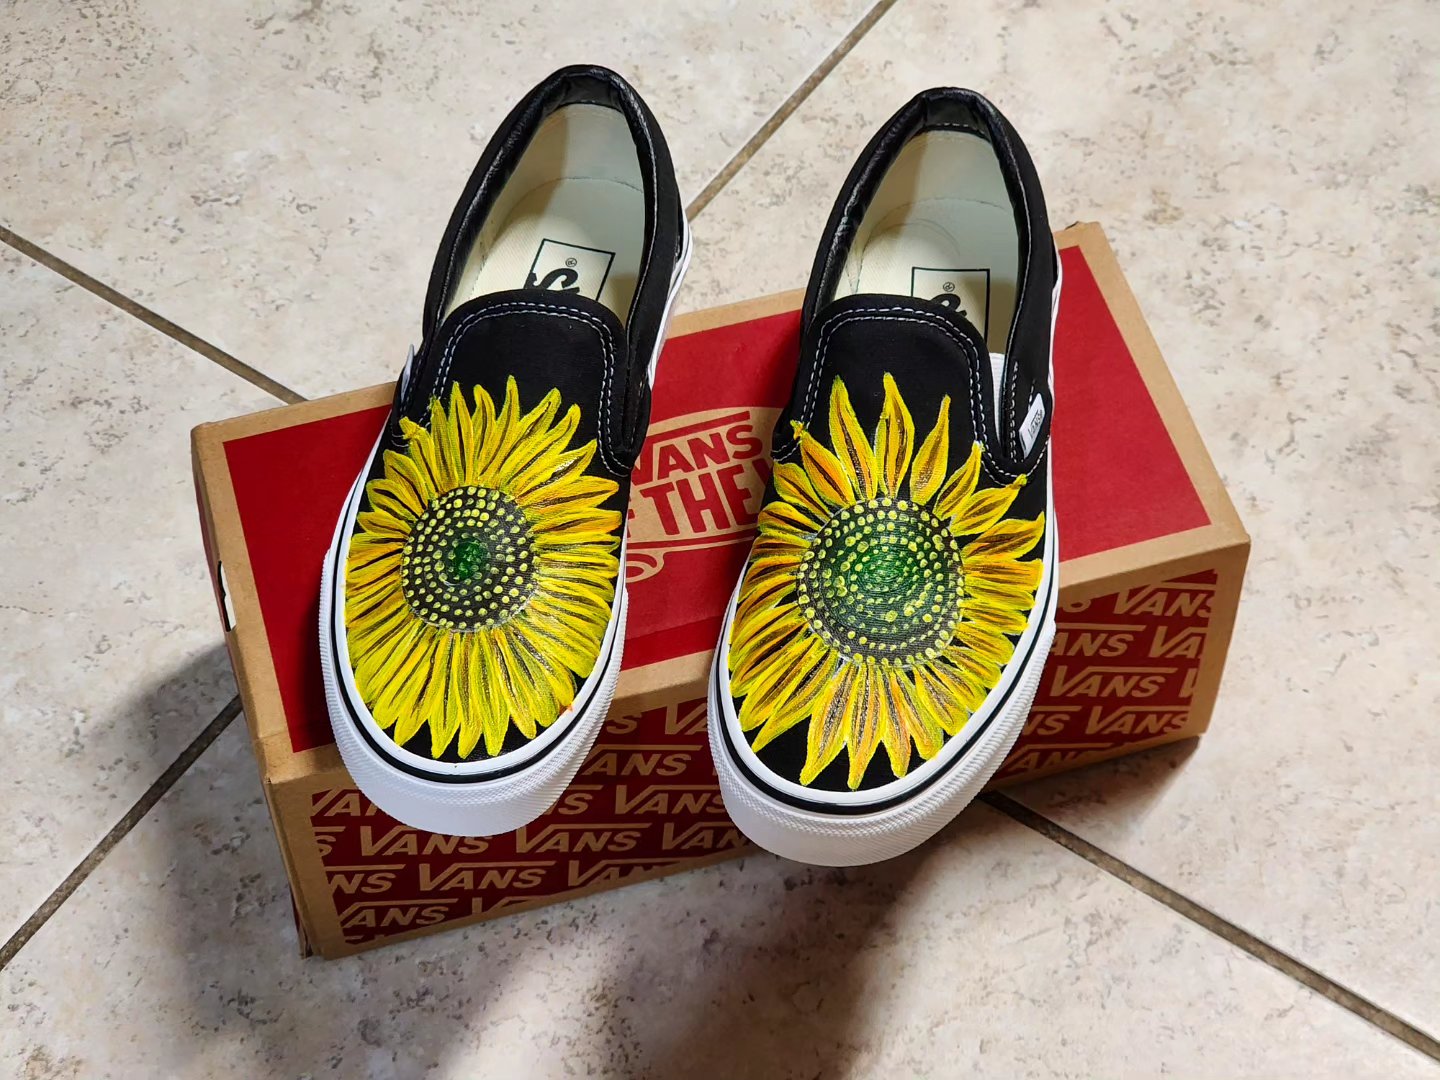 Handpainted vans with sunflowers and butterflies. Washer and dryer safe. Size: 5.5 US men | 7 US women.